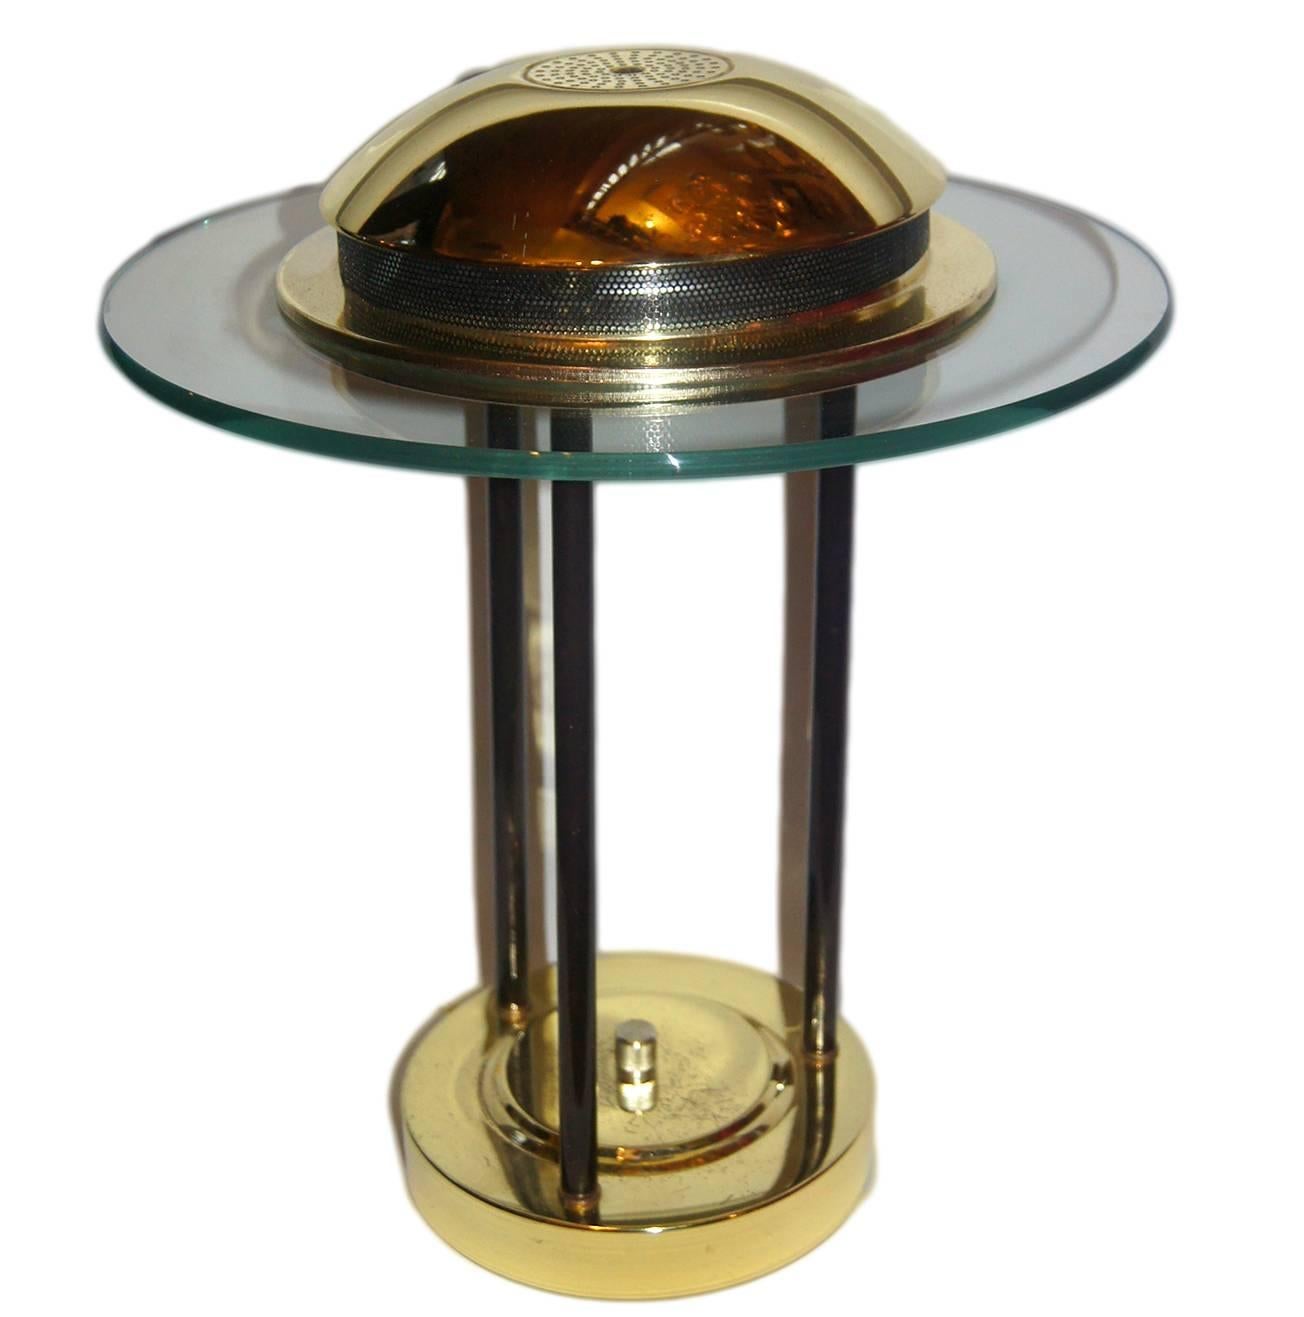 A vintage 1960s Italian brass and glass desk lamp.

Measurements:
Height 16